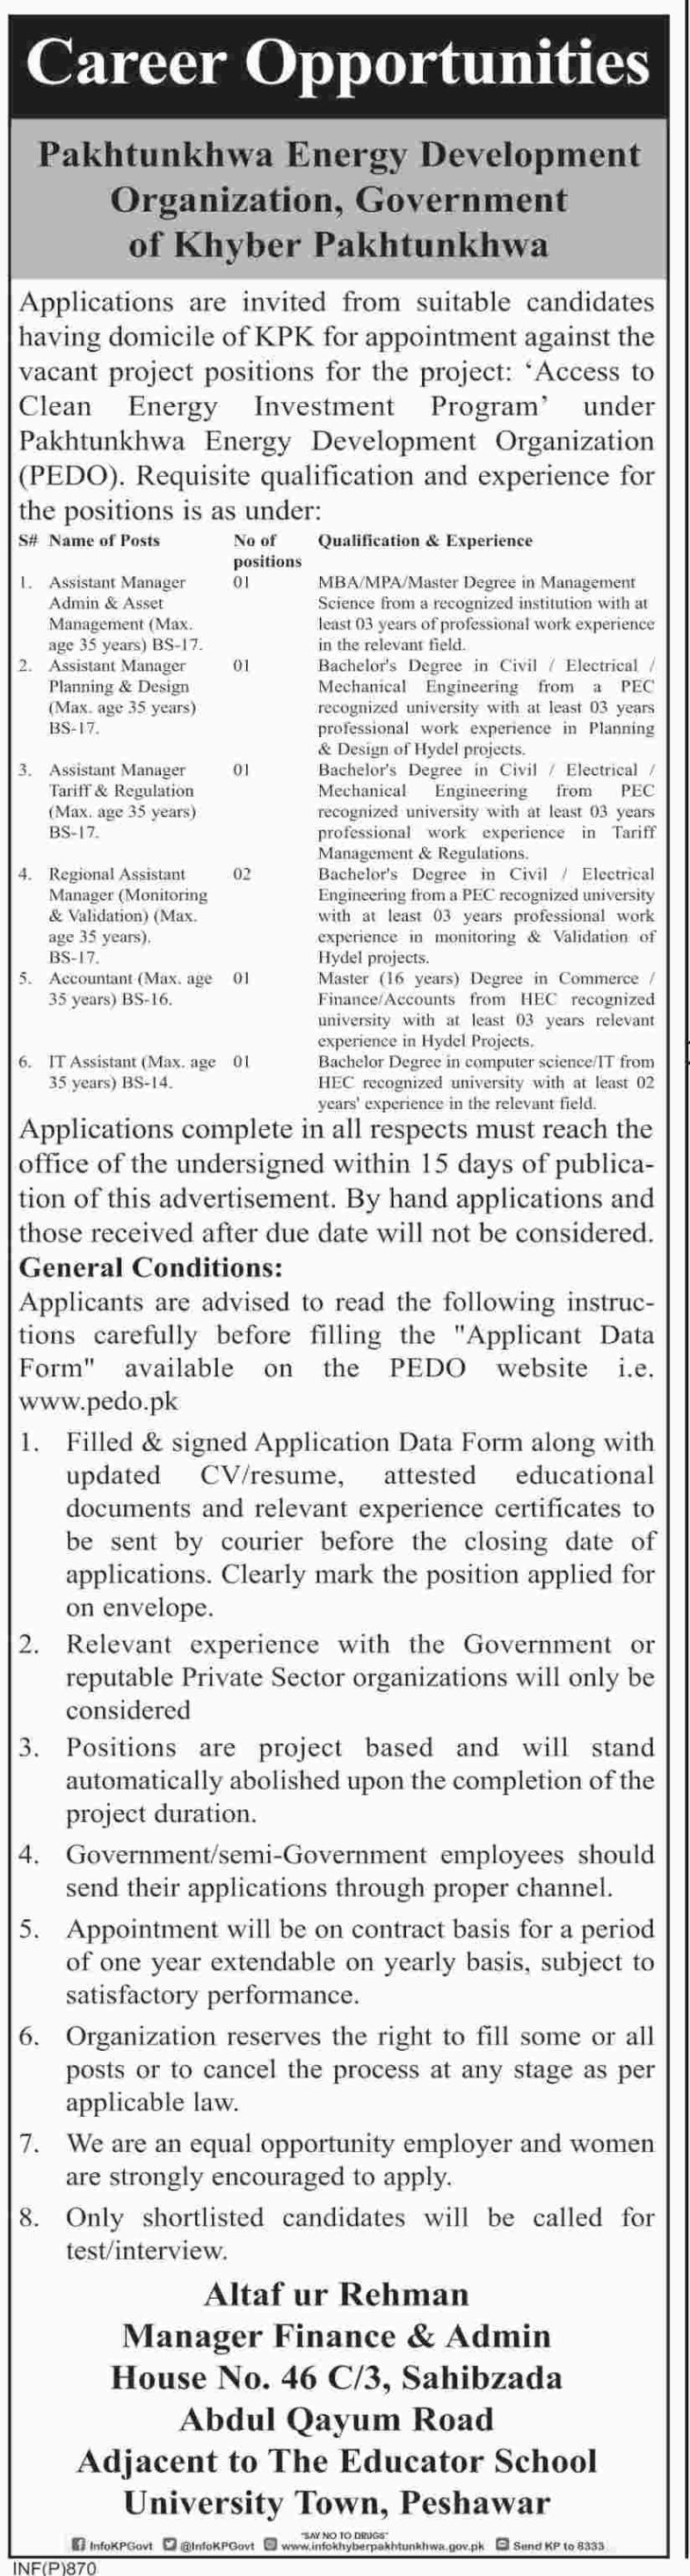 PEDO KP Jobs 2019 for 7+ IT, Accounts, Engineering and Assistant Managers